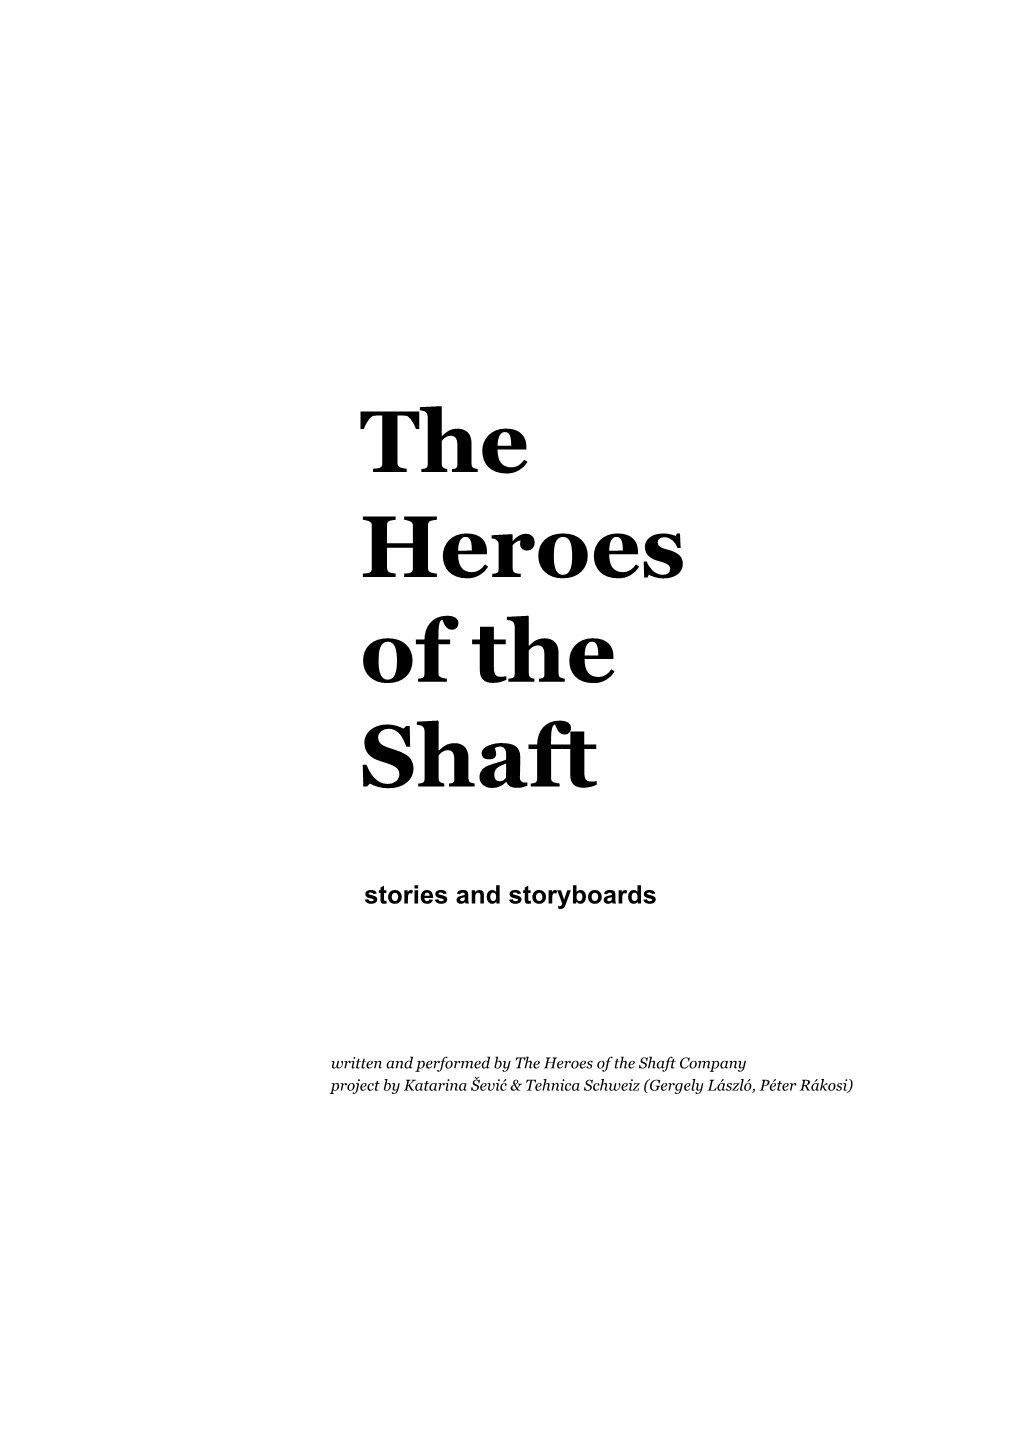 The Heroes of the Shaft